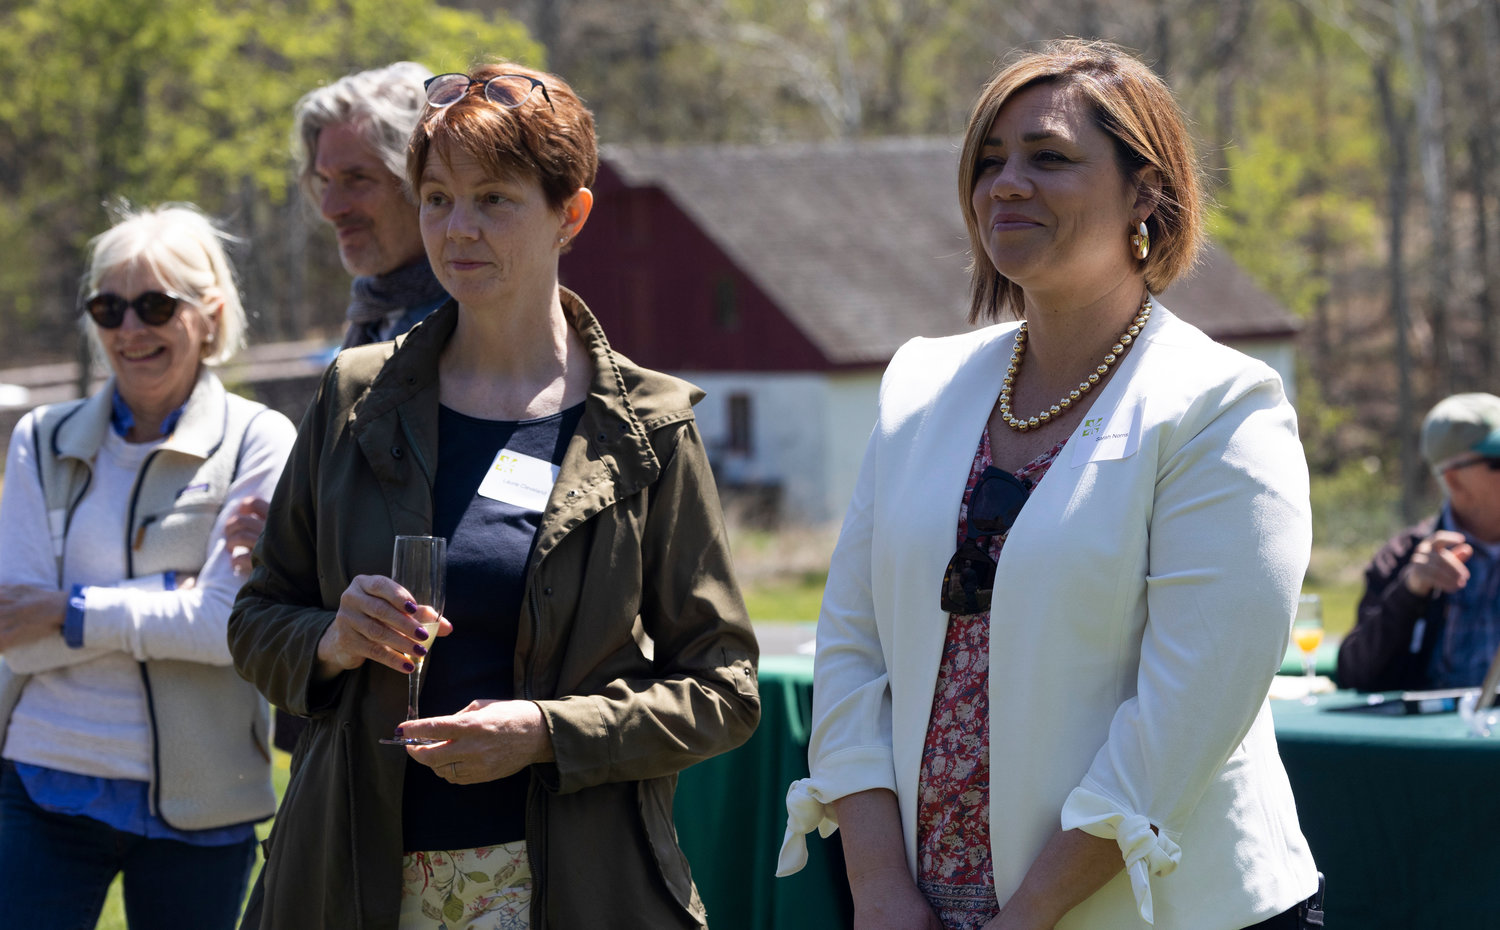 Laurie Cleveland, executive director of Sourland Conservancy, with Sarah Norris, Bowman’s Hill director of donor and partner relations.